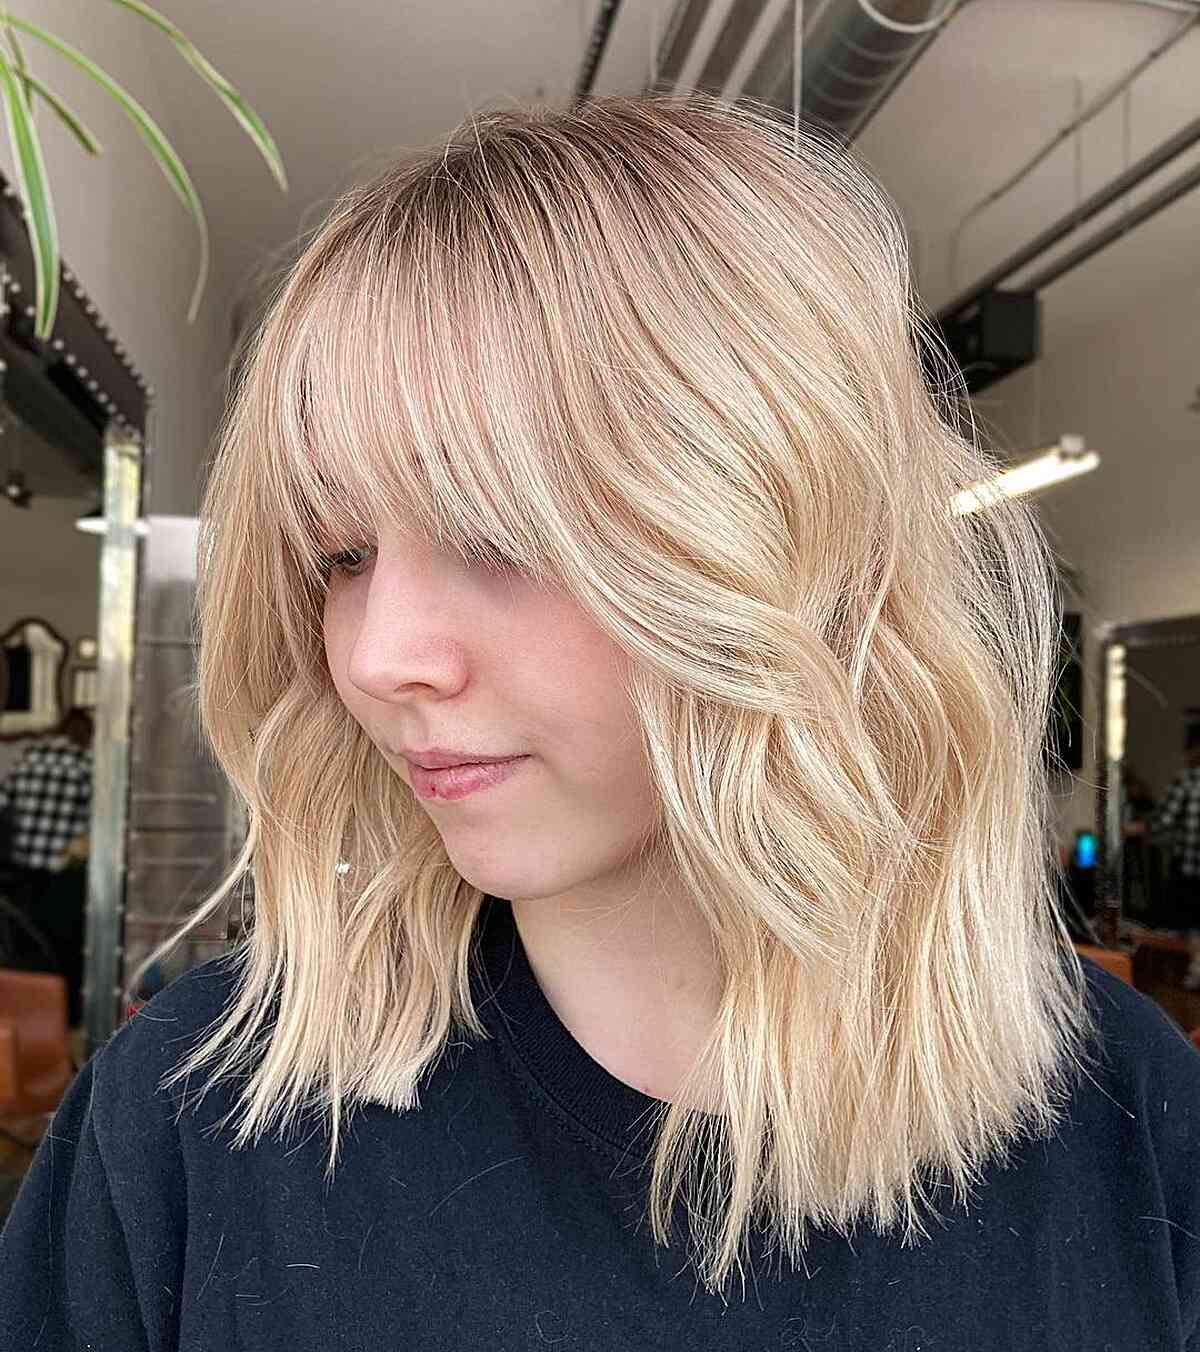 Shoulder-Length Dusted Shaggy Layers with Wispy Bangs